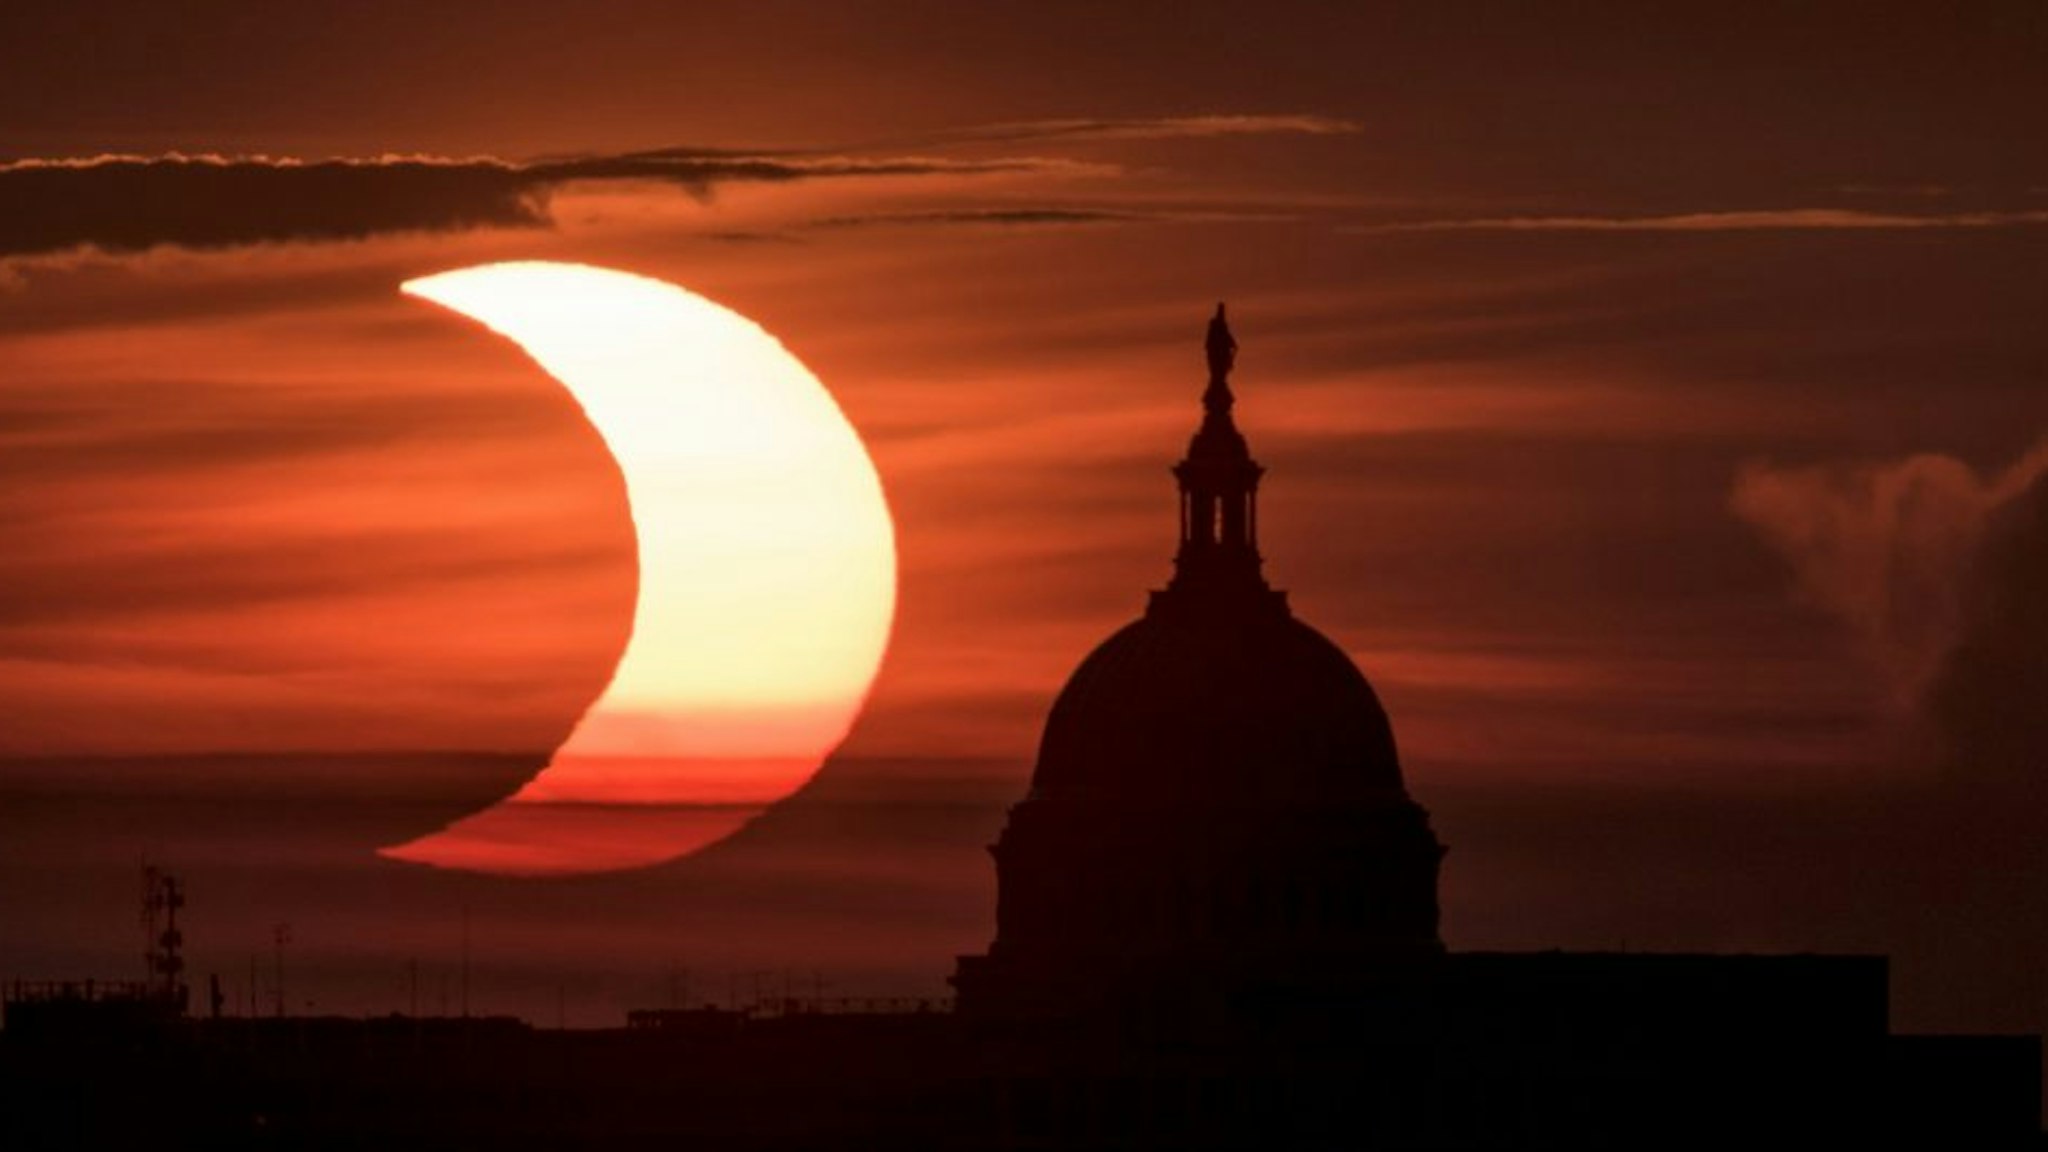 ARLINGTON, VIRGINIA - JUNE 10: In this handout image provided by NASA, a partial solar eclipse is seen as the sun rises behind the Capitol Building on June 10, 2021 in Arlington, Virginia. Northeast states in the U.S. will see a rare eclipsed sunrise, while in other parts of the Northern Hemisphere, this annular eclipse will be seen as a visible thin outer ring of the sun's disk that is not completely covered by the smaller dark disk of the moon, a so-called "ring of fire".